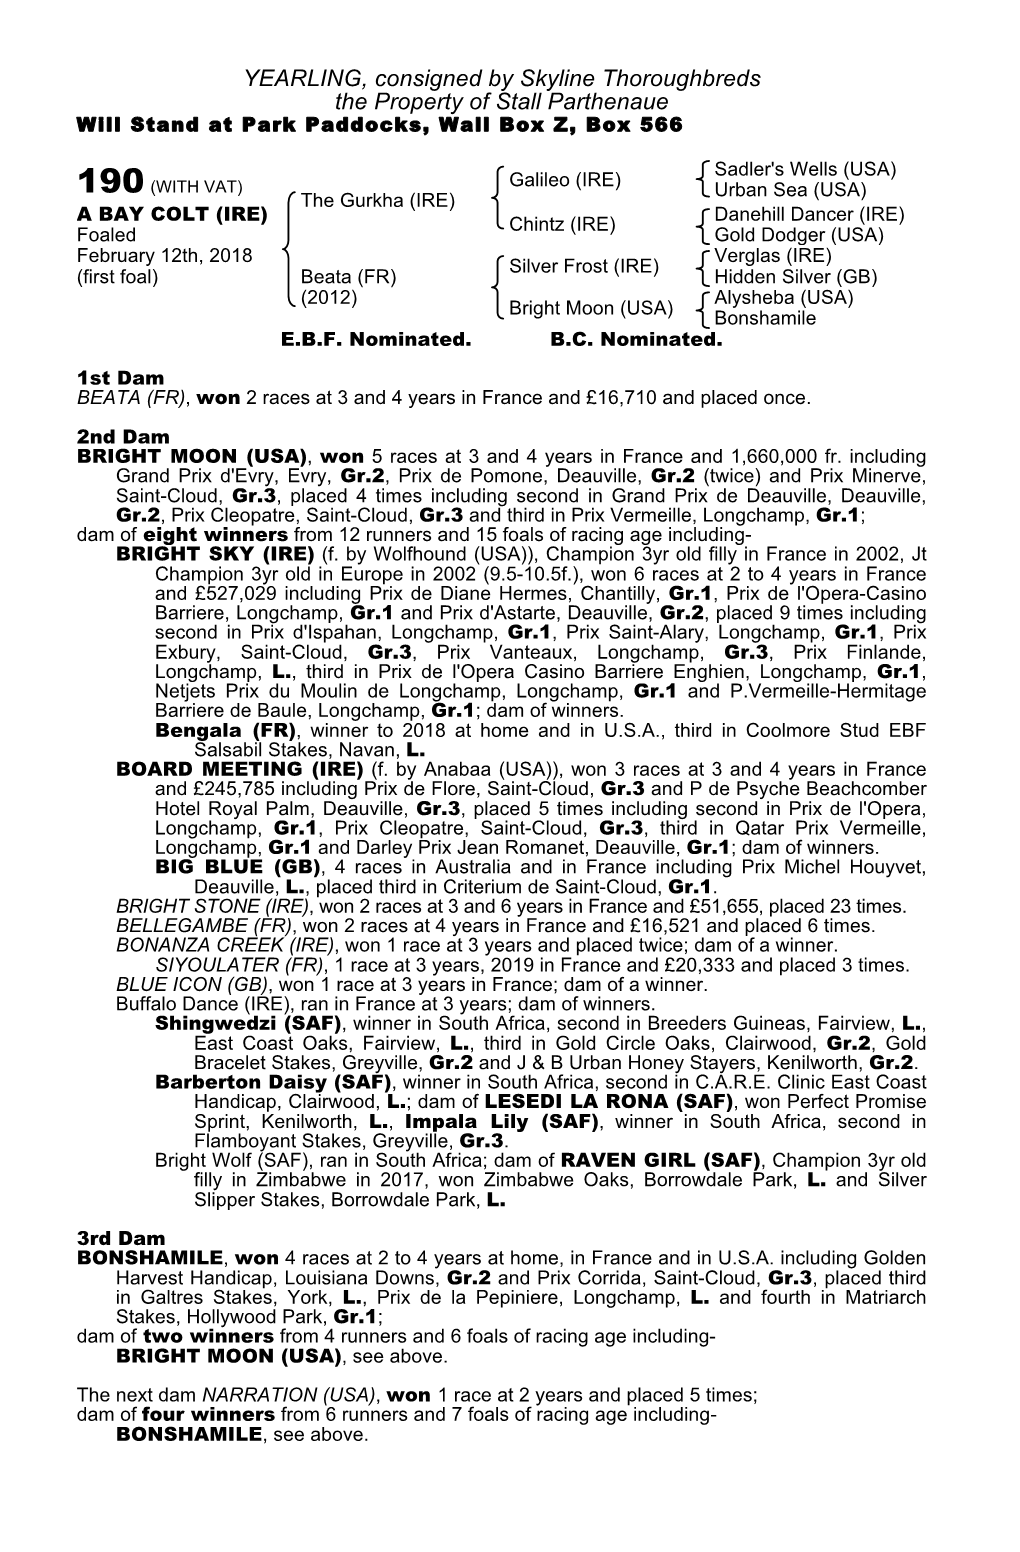 YEARLING, Consigned by Skyline Thoroughbreds the Property of Stall Parthenaue Will Stand at Park Paddocks, Wall Box Z, Box 566